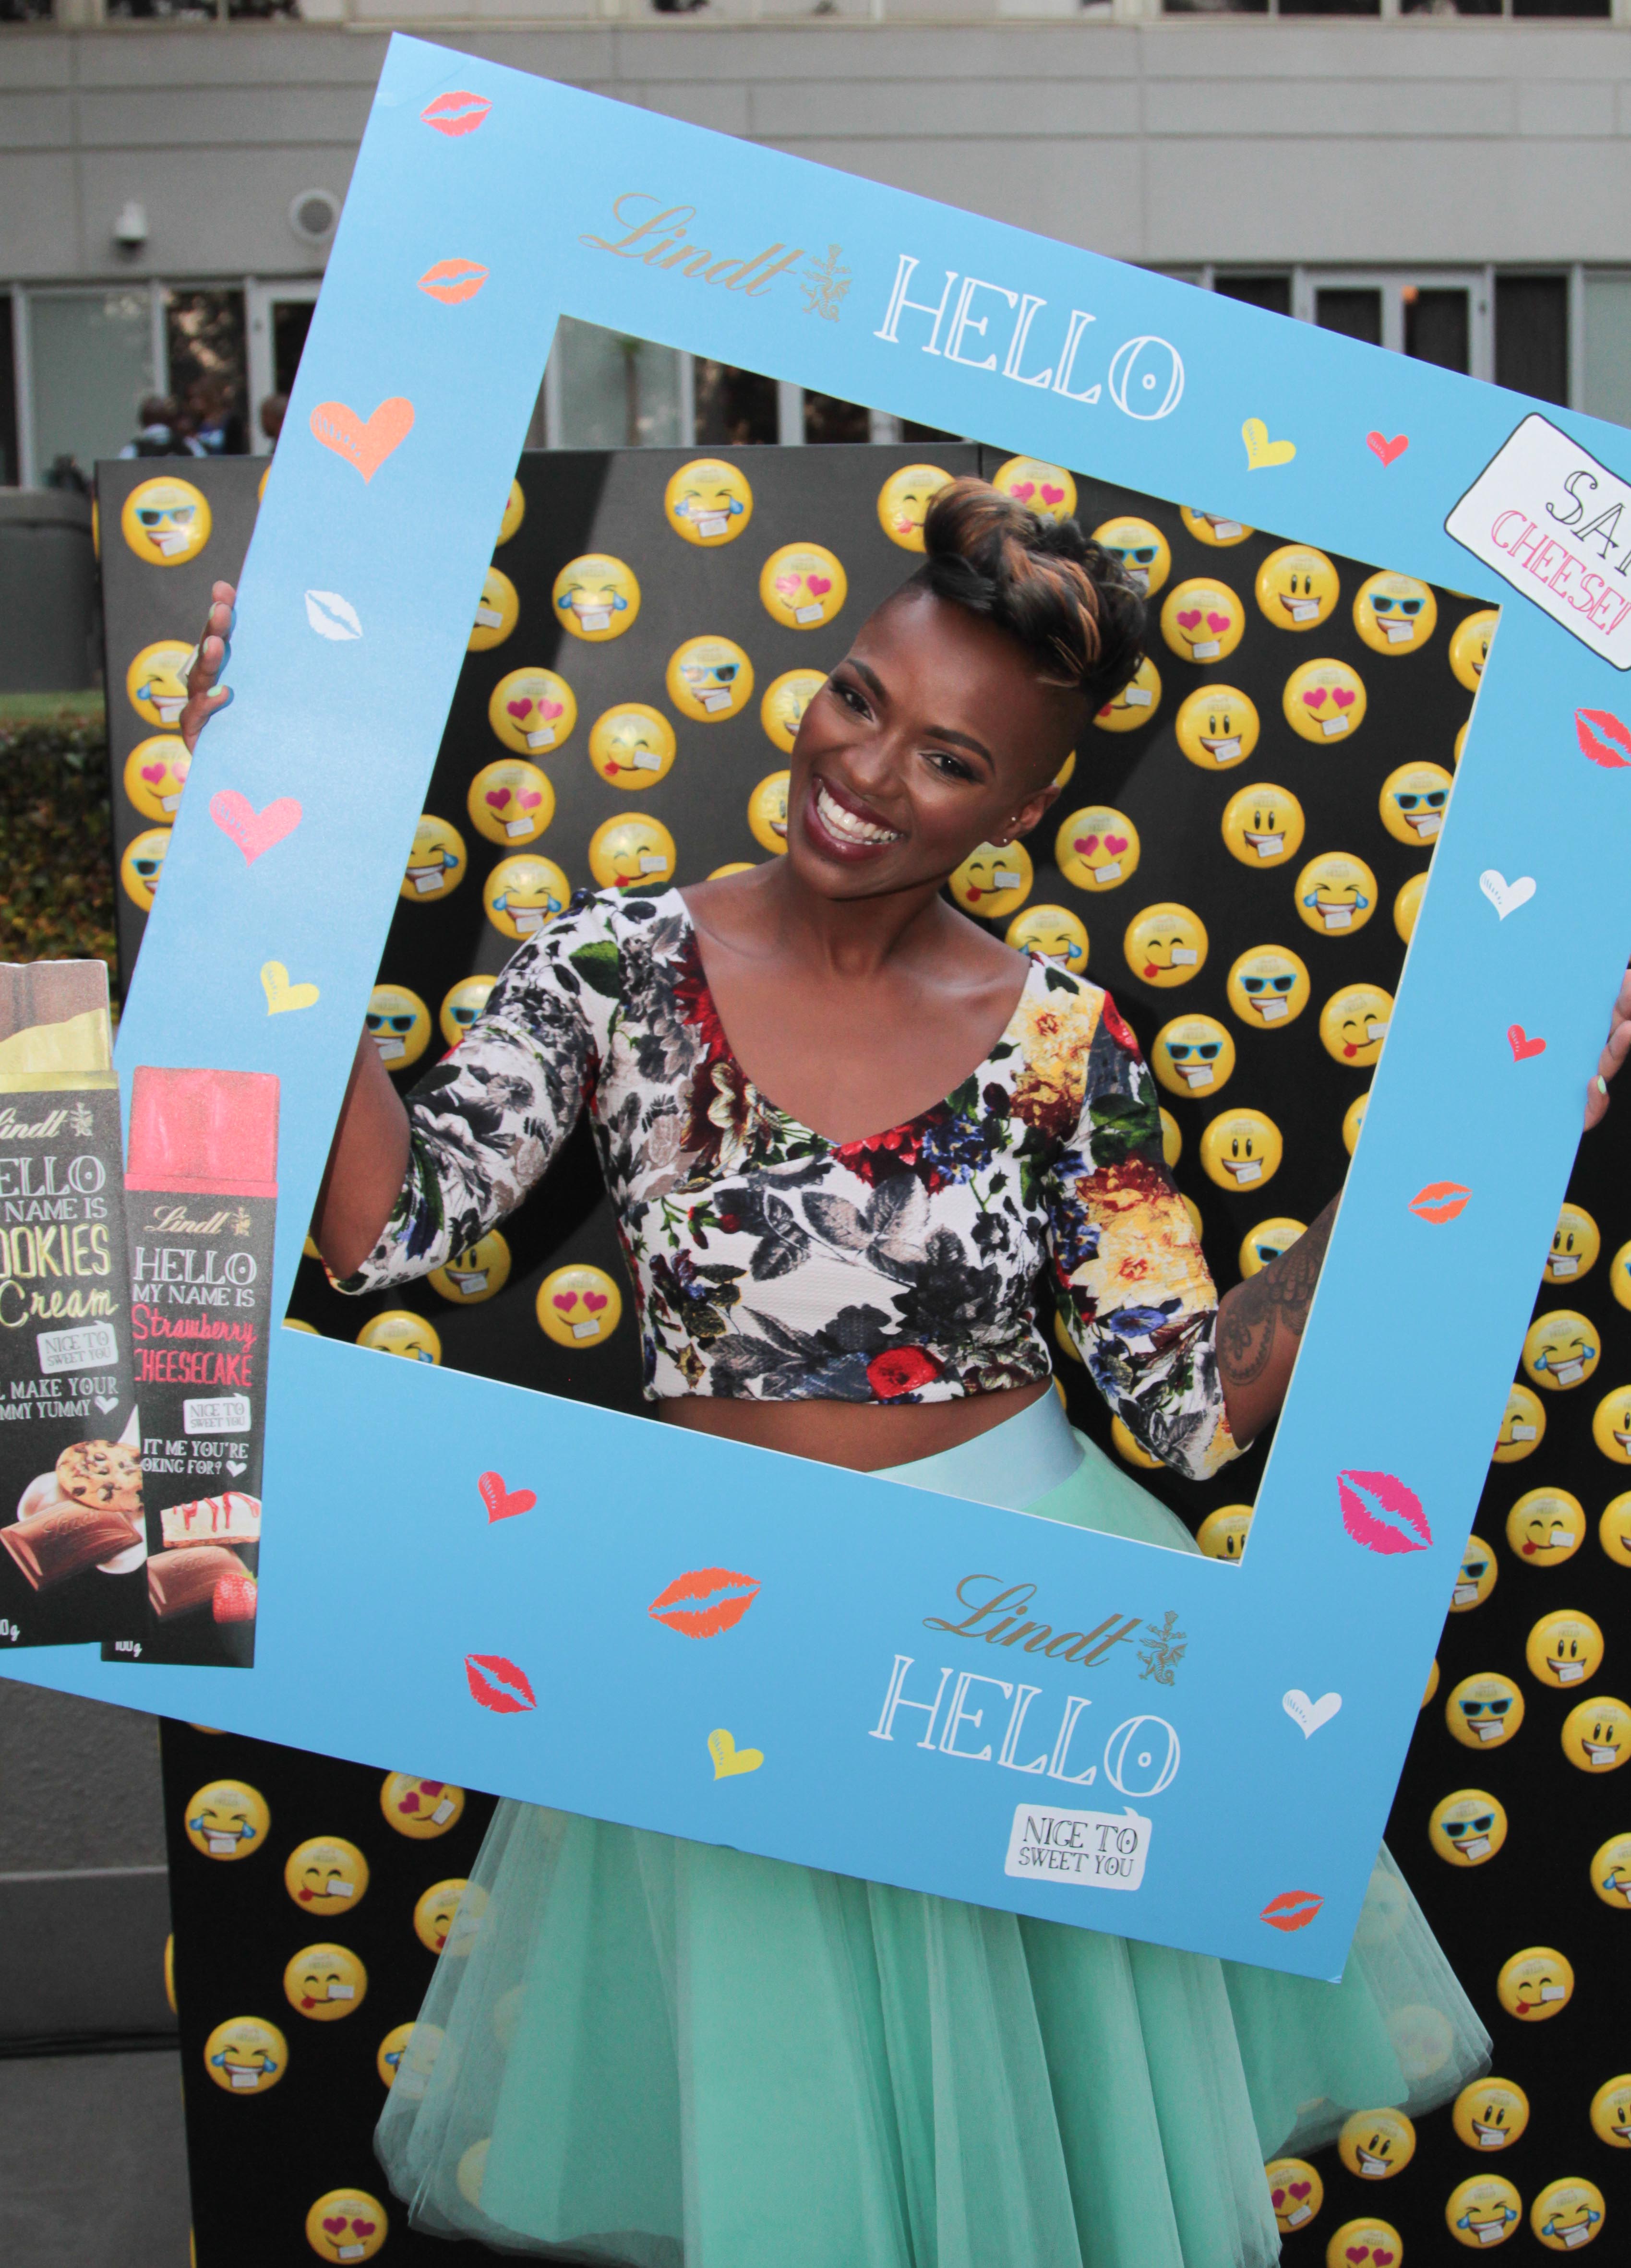 Dj Fix from 5fm at the LINDT HELLO launch (image courtesy of LINDT)